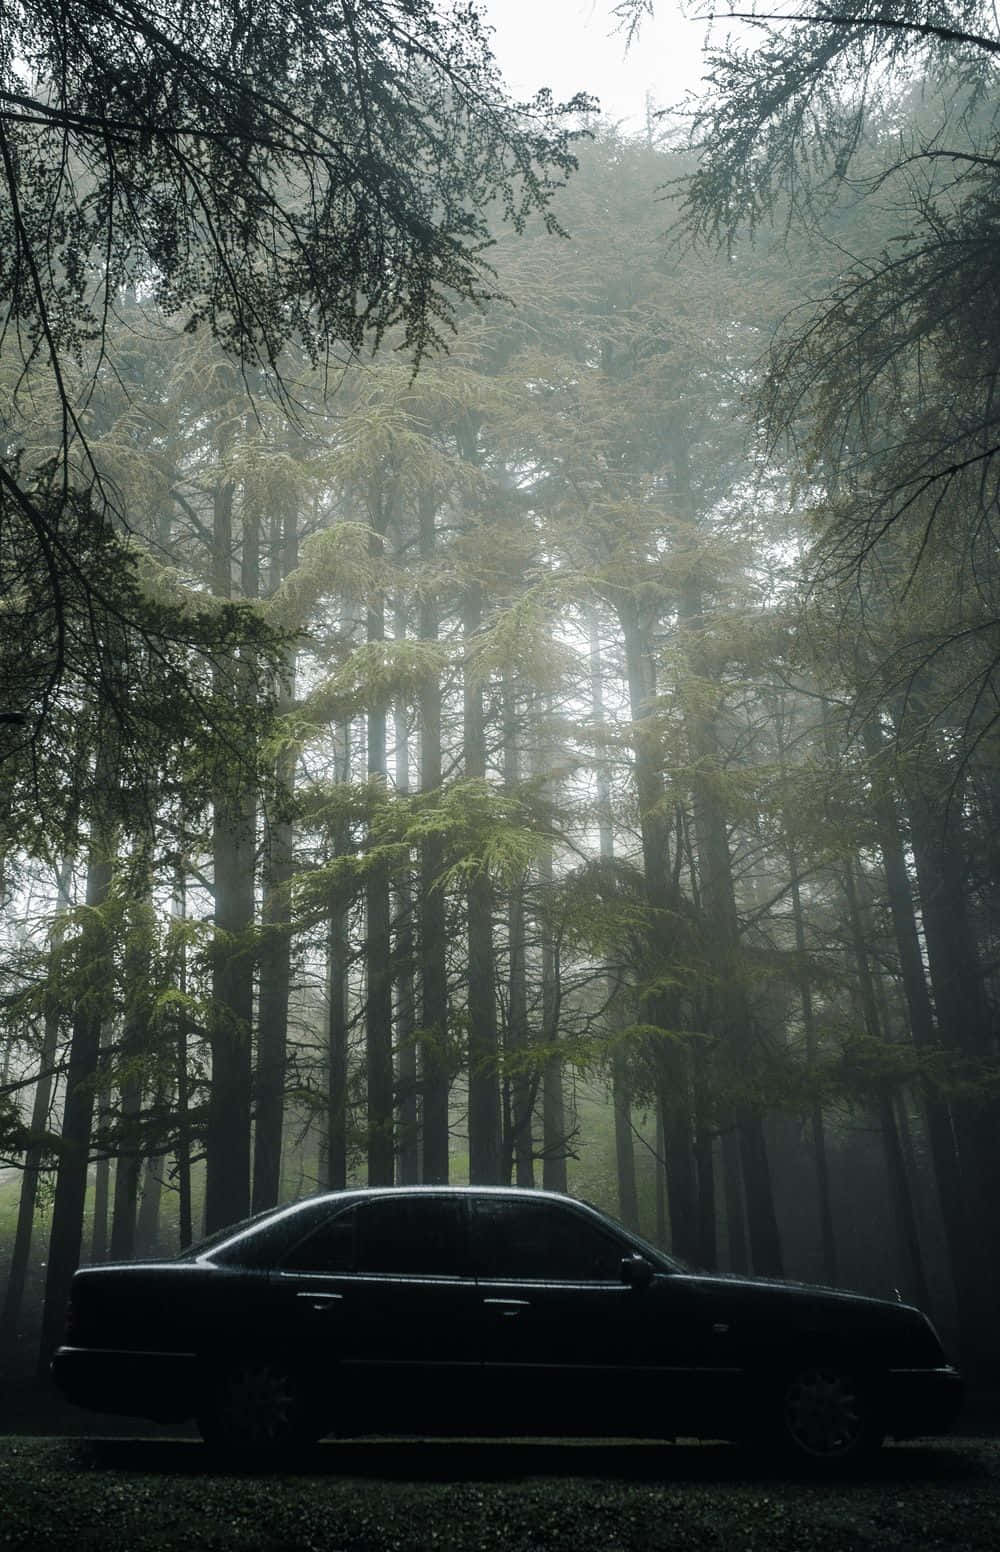 A Black Car Parked In A Foggy Forest